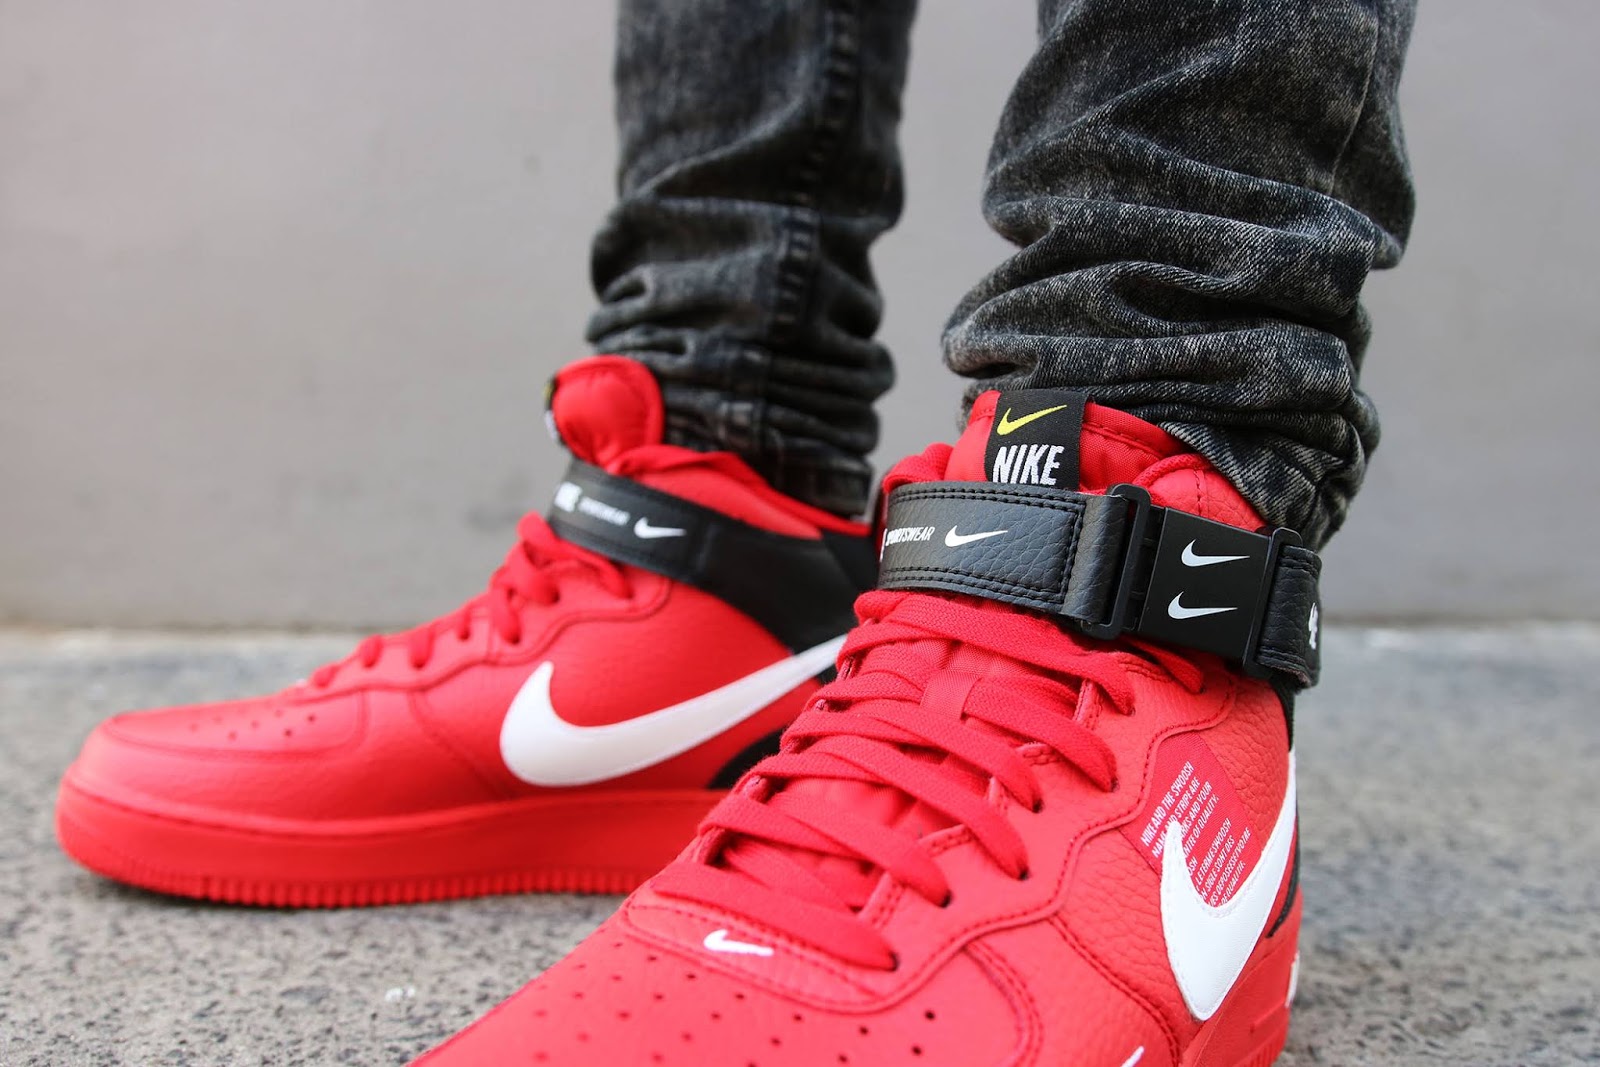 nike air force 1 07 lv8 utility mid red